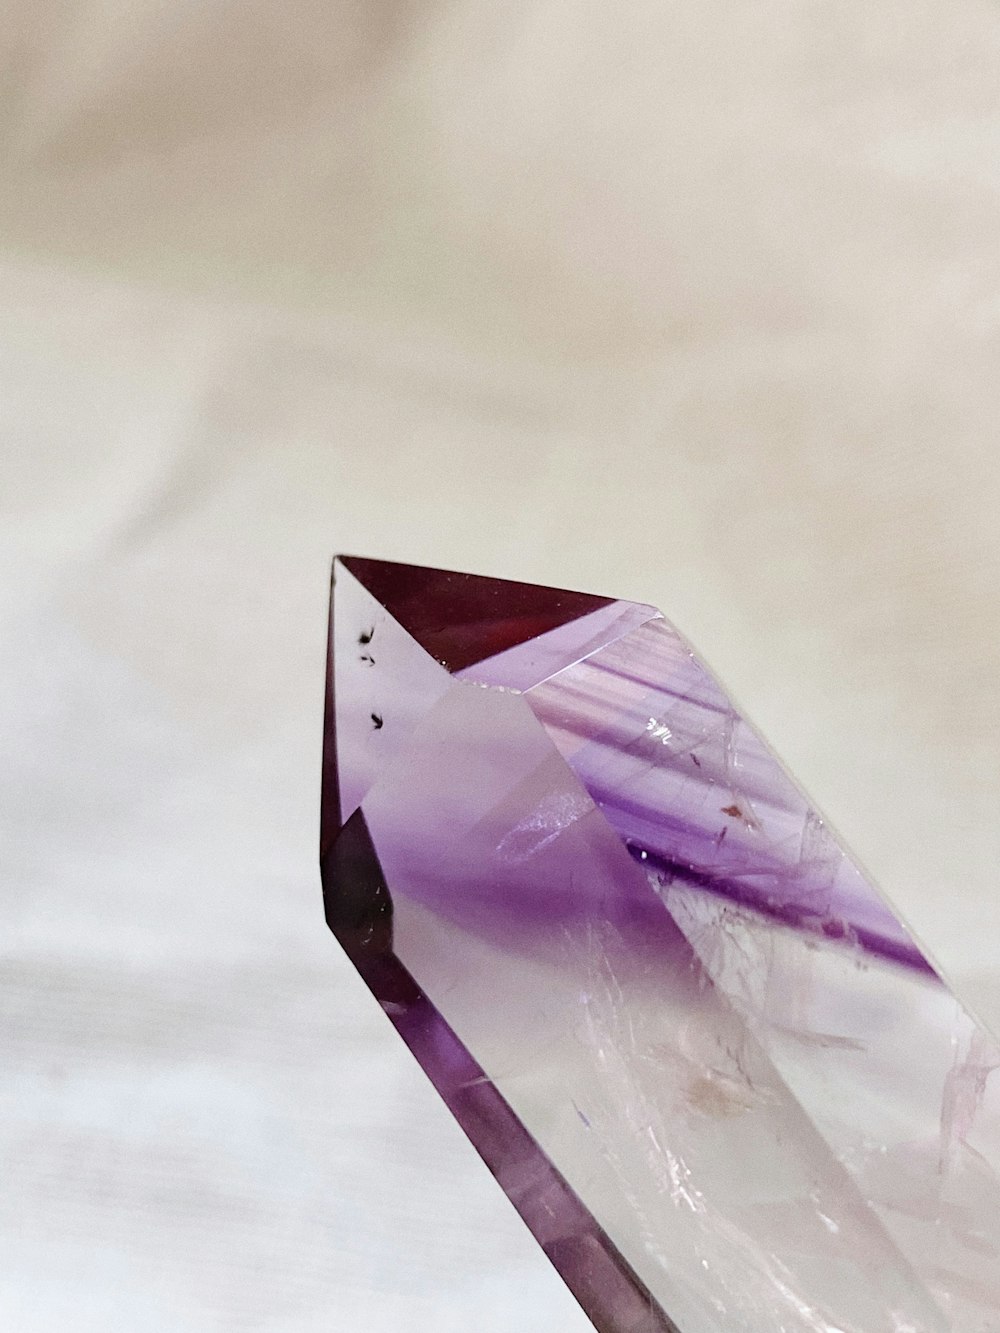 an amethyst shaped piece of glass sitting on a table